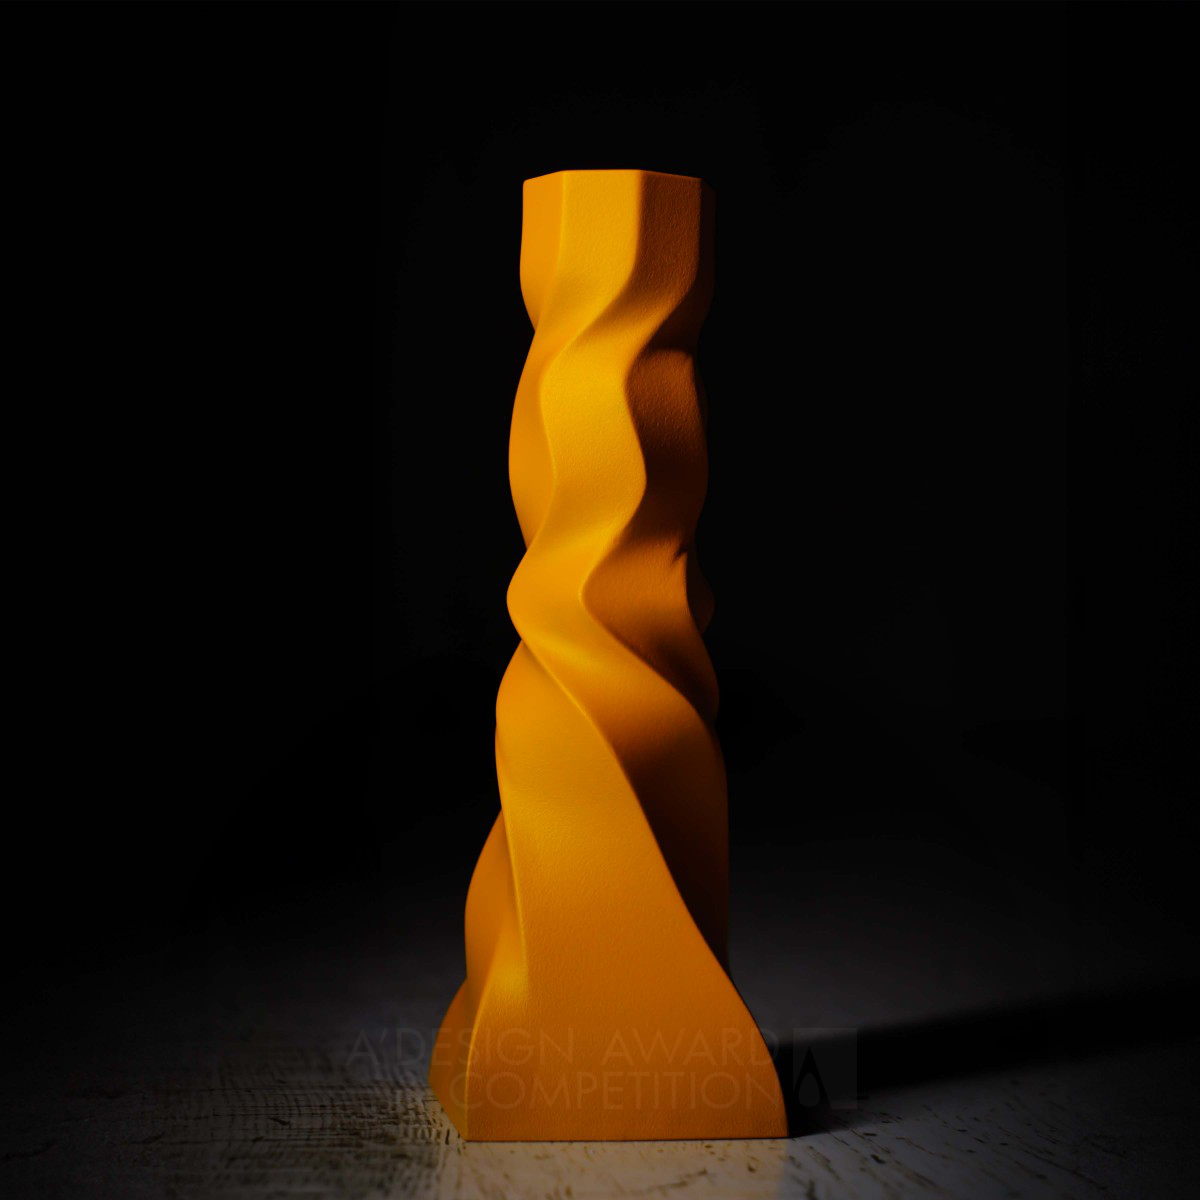 Kazoo Design wins Iron at the prestigious A' Decorative Items and Homeware Design Award with 428 Candleholder.